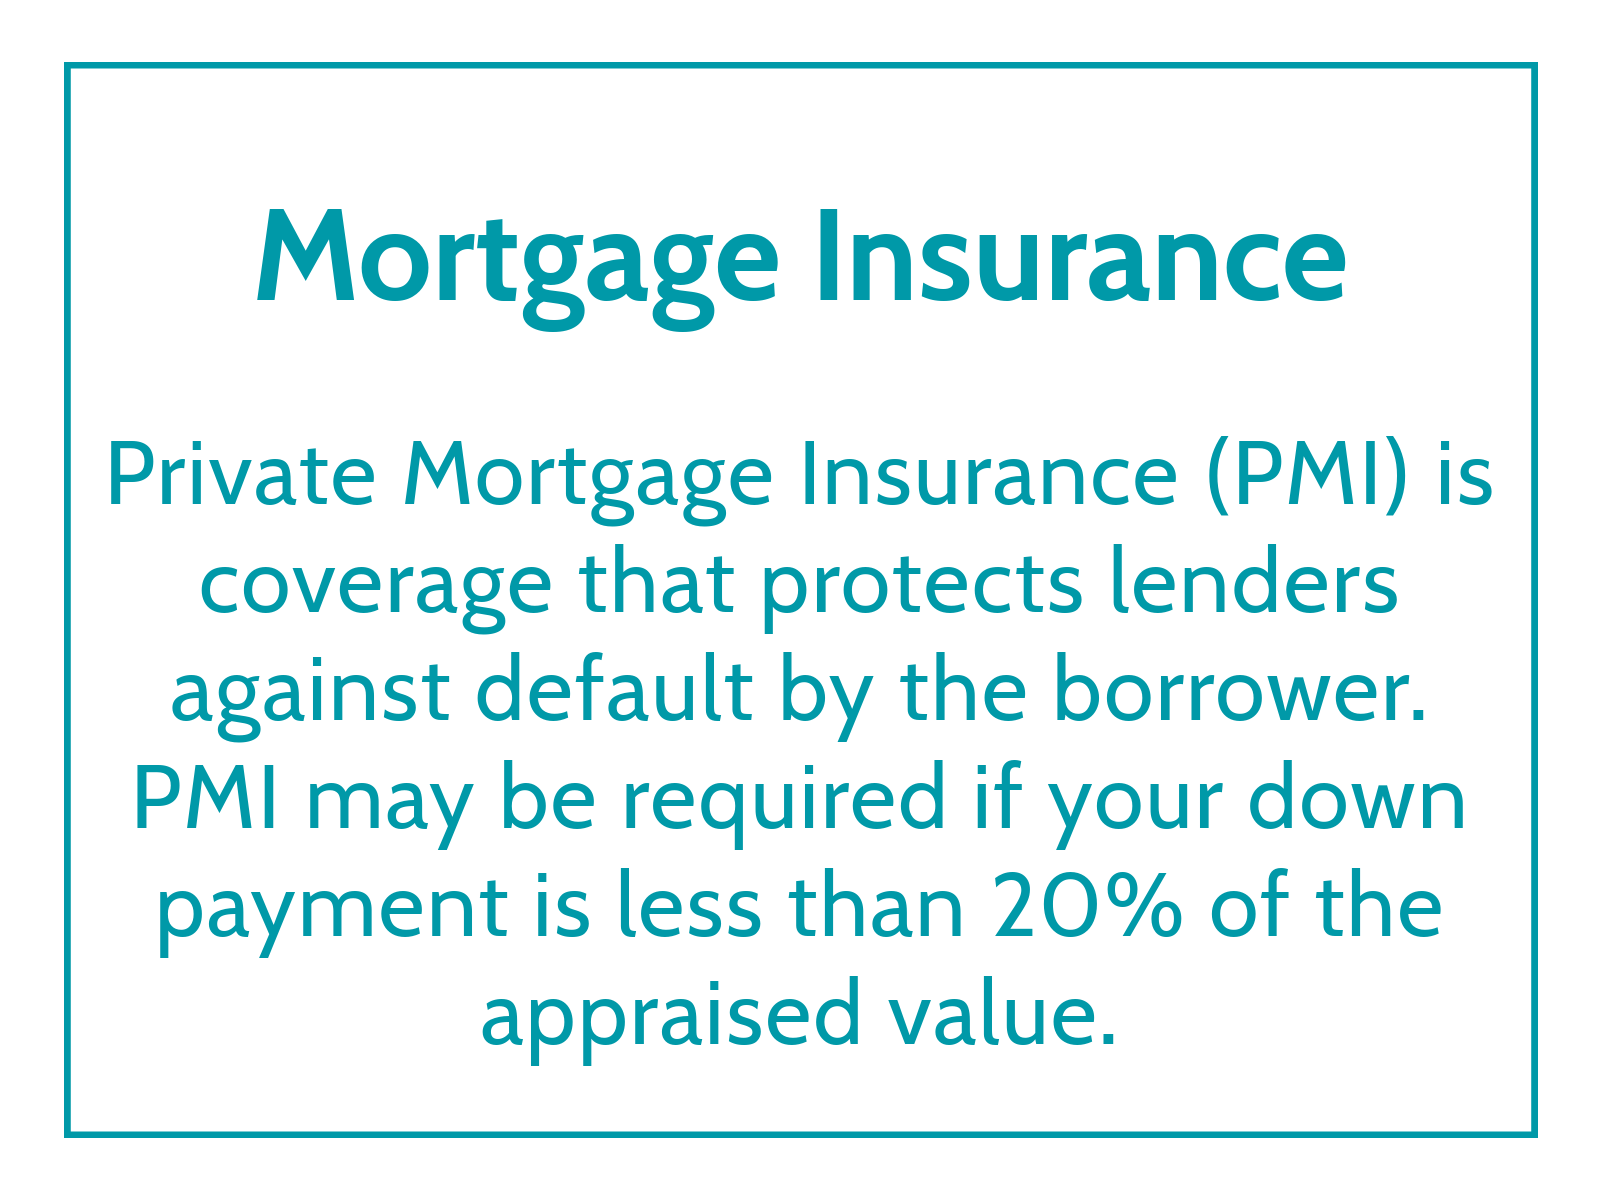 quote graphic - mortgage insurance is coverage that protects lenders against default by the borrower and may be required if your down payment is less than 20%.